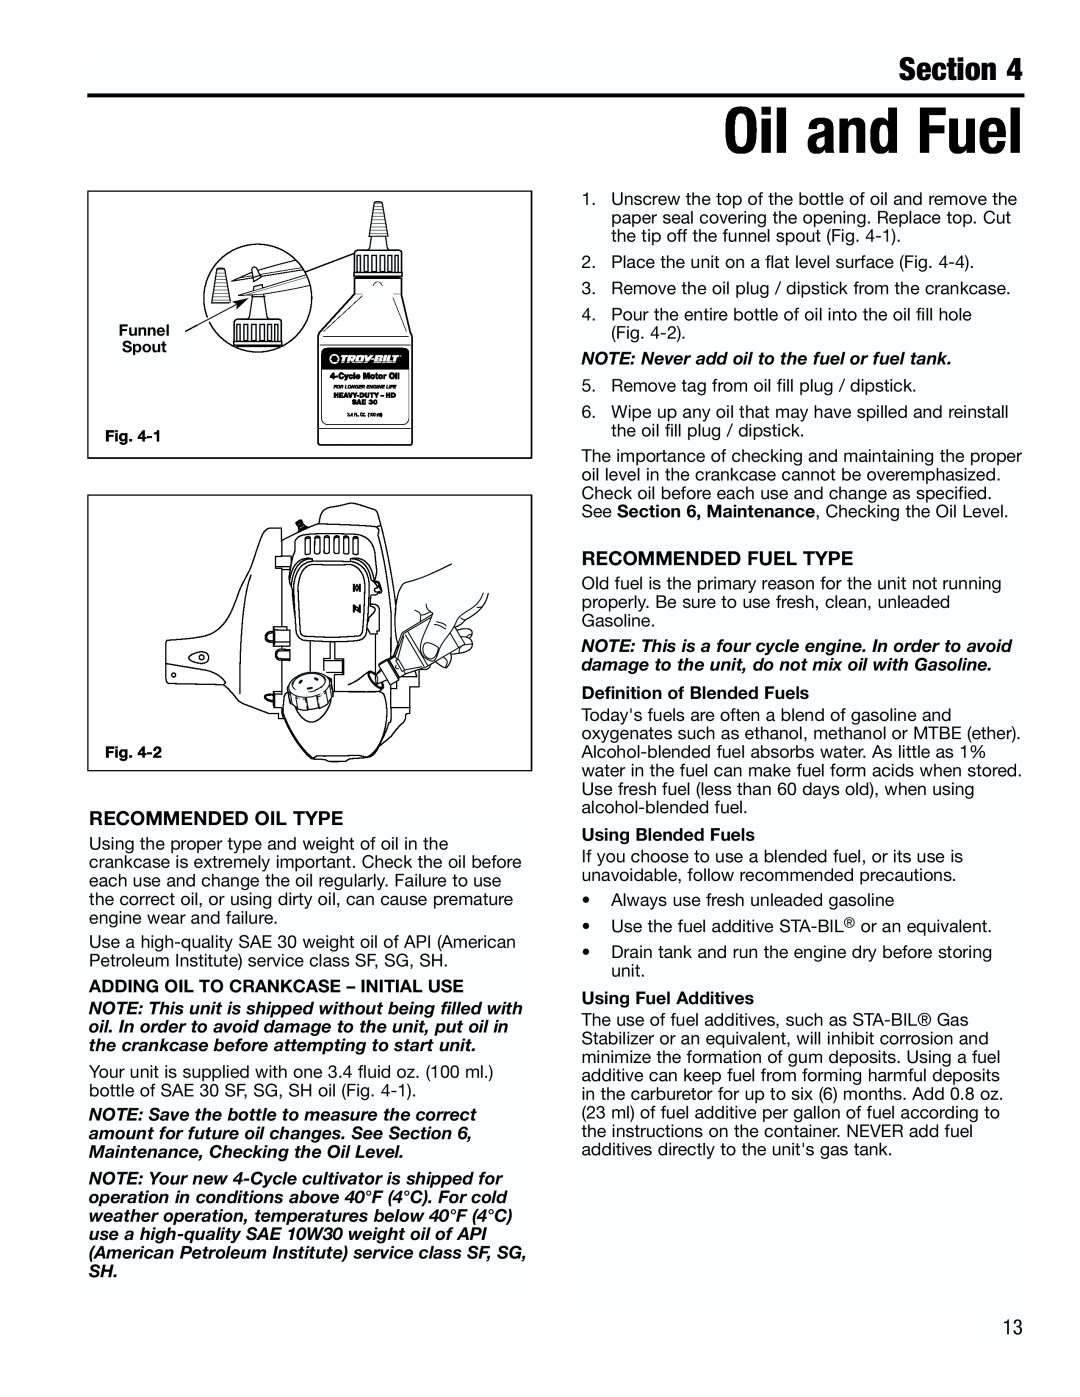 Troy-Bilt TB4000 Oil and Fuel, Recommended Oil Type, Recommended Fuel Type, Section, Adding Oil To Crankcase - Initial Use 